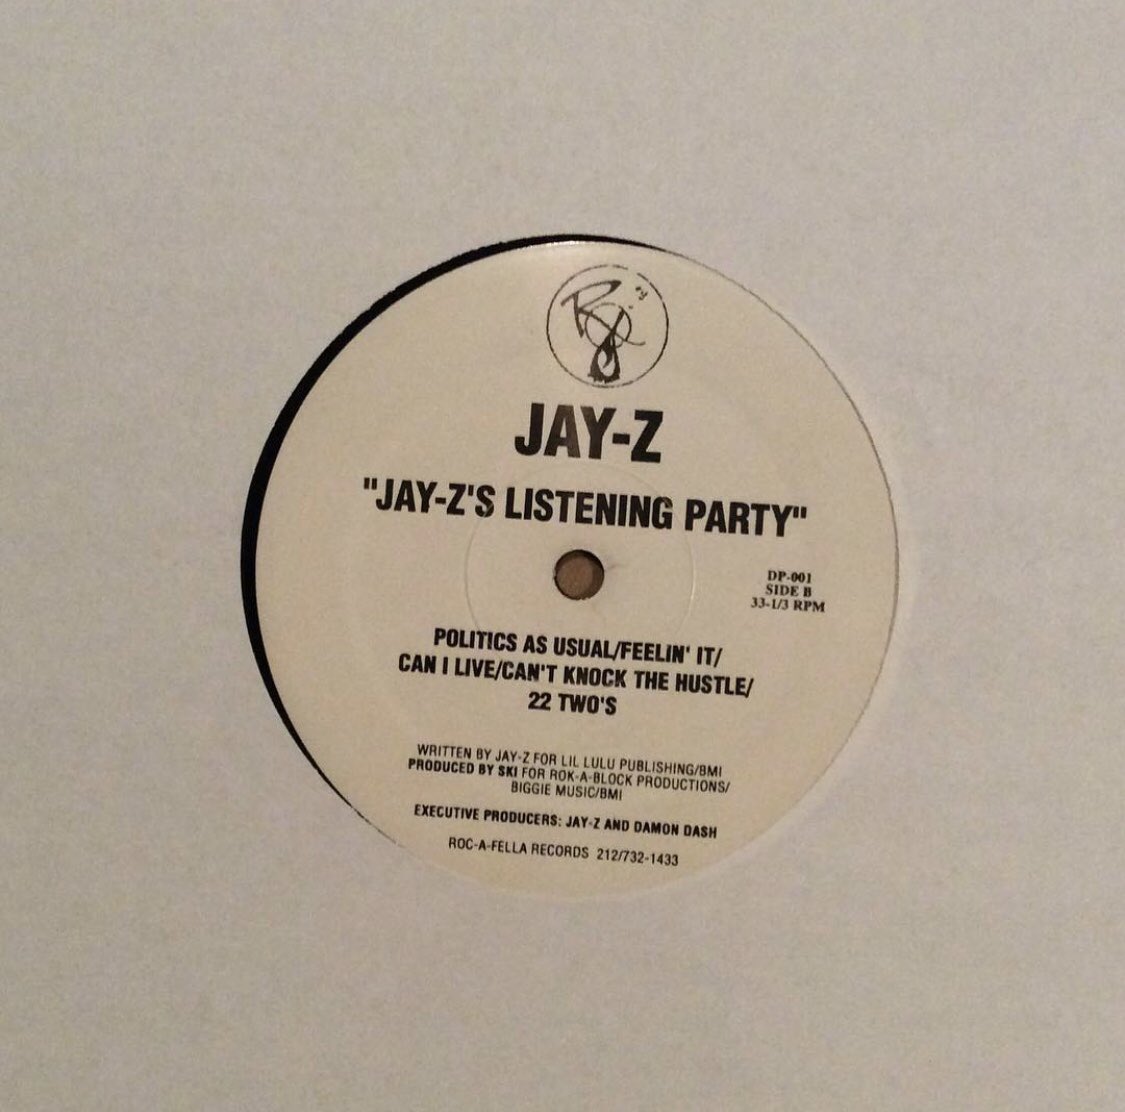 1995, JayZ’s 1st official press shoot x Dead Presidents pt1/ 5 Track Reasonable Doubt sampler vinyl. JayZ, Dame & the rest of the Rocafella team stocked NYC shelves with these vinyls. S/O  @AintNoJigga for posting pics of the A/B side vinyl.